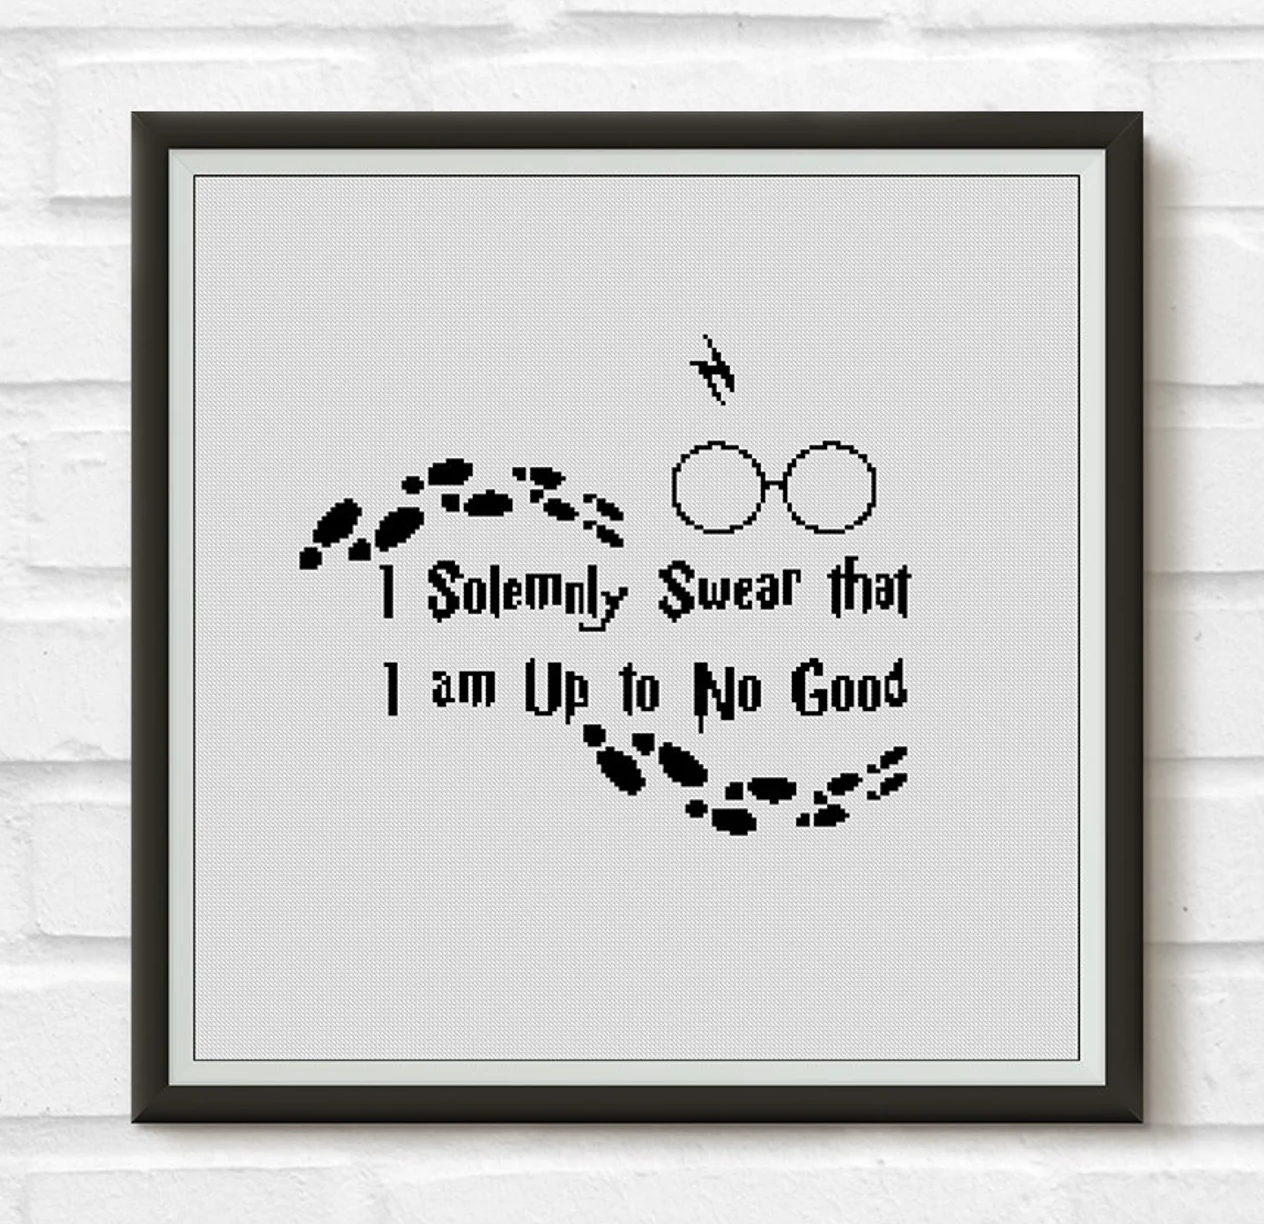 Cross stitch of the quote "I solemnly swear that I am up to no good"